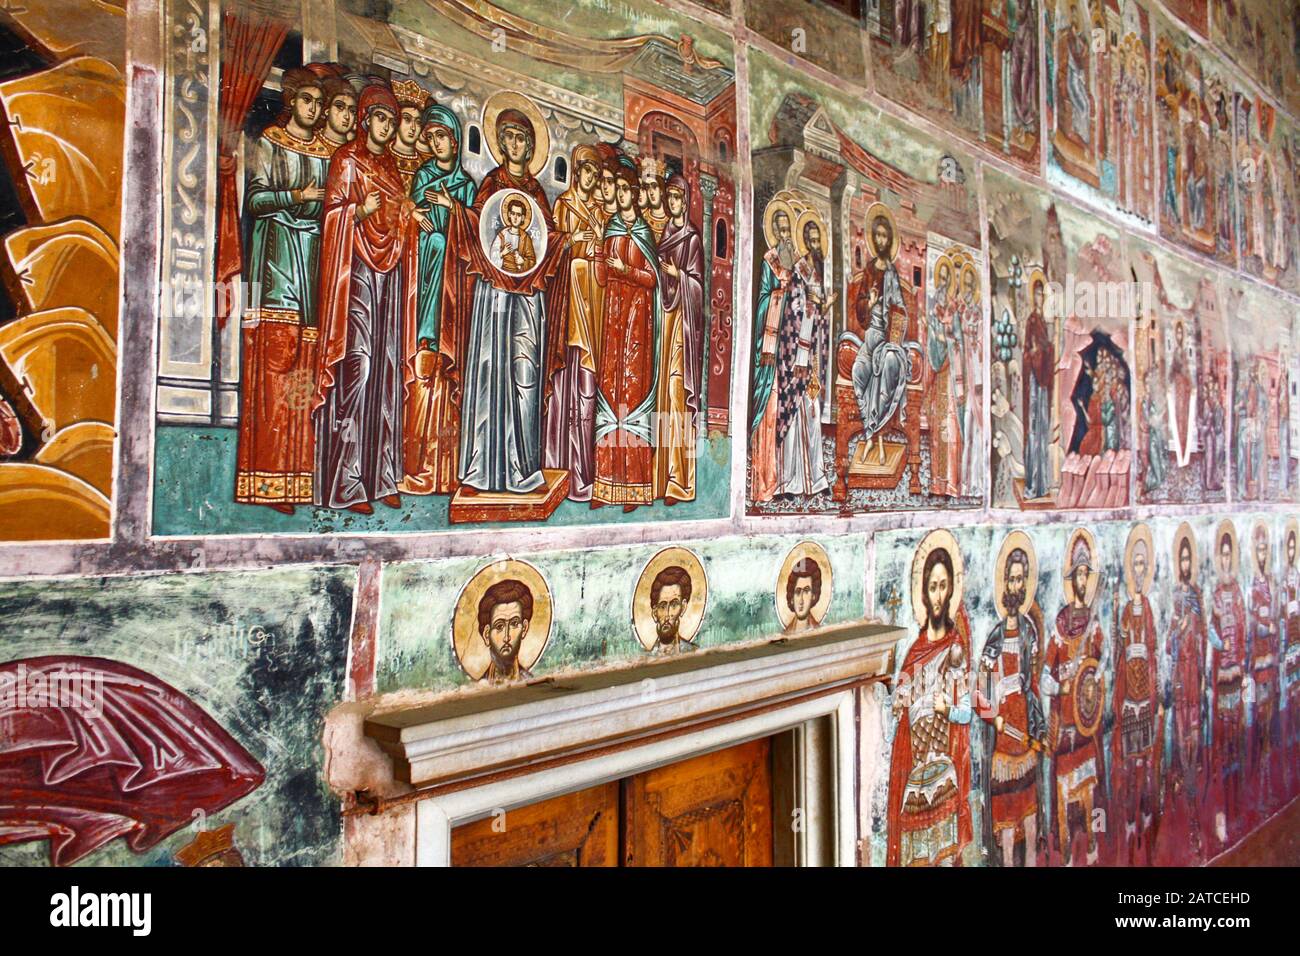 Walls covered in Byzantine icons. The Holy and Great Monastery of Vatopedi – an Eastern Orthodox monastery on Mount Athos, Greece. Stock Photo